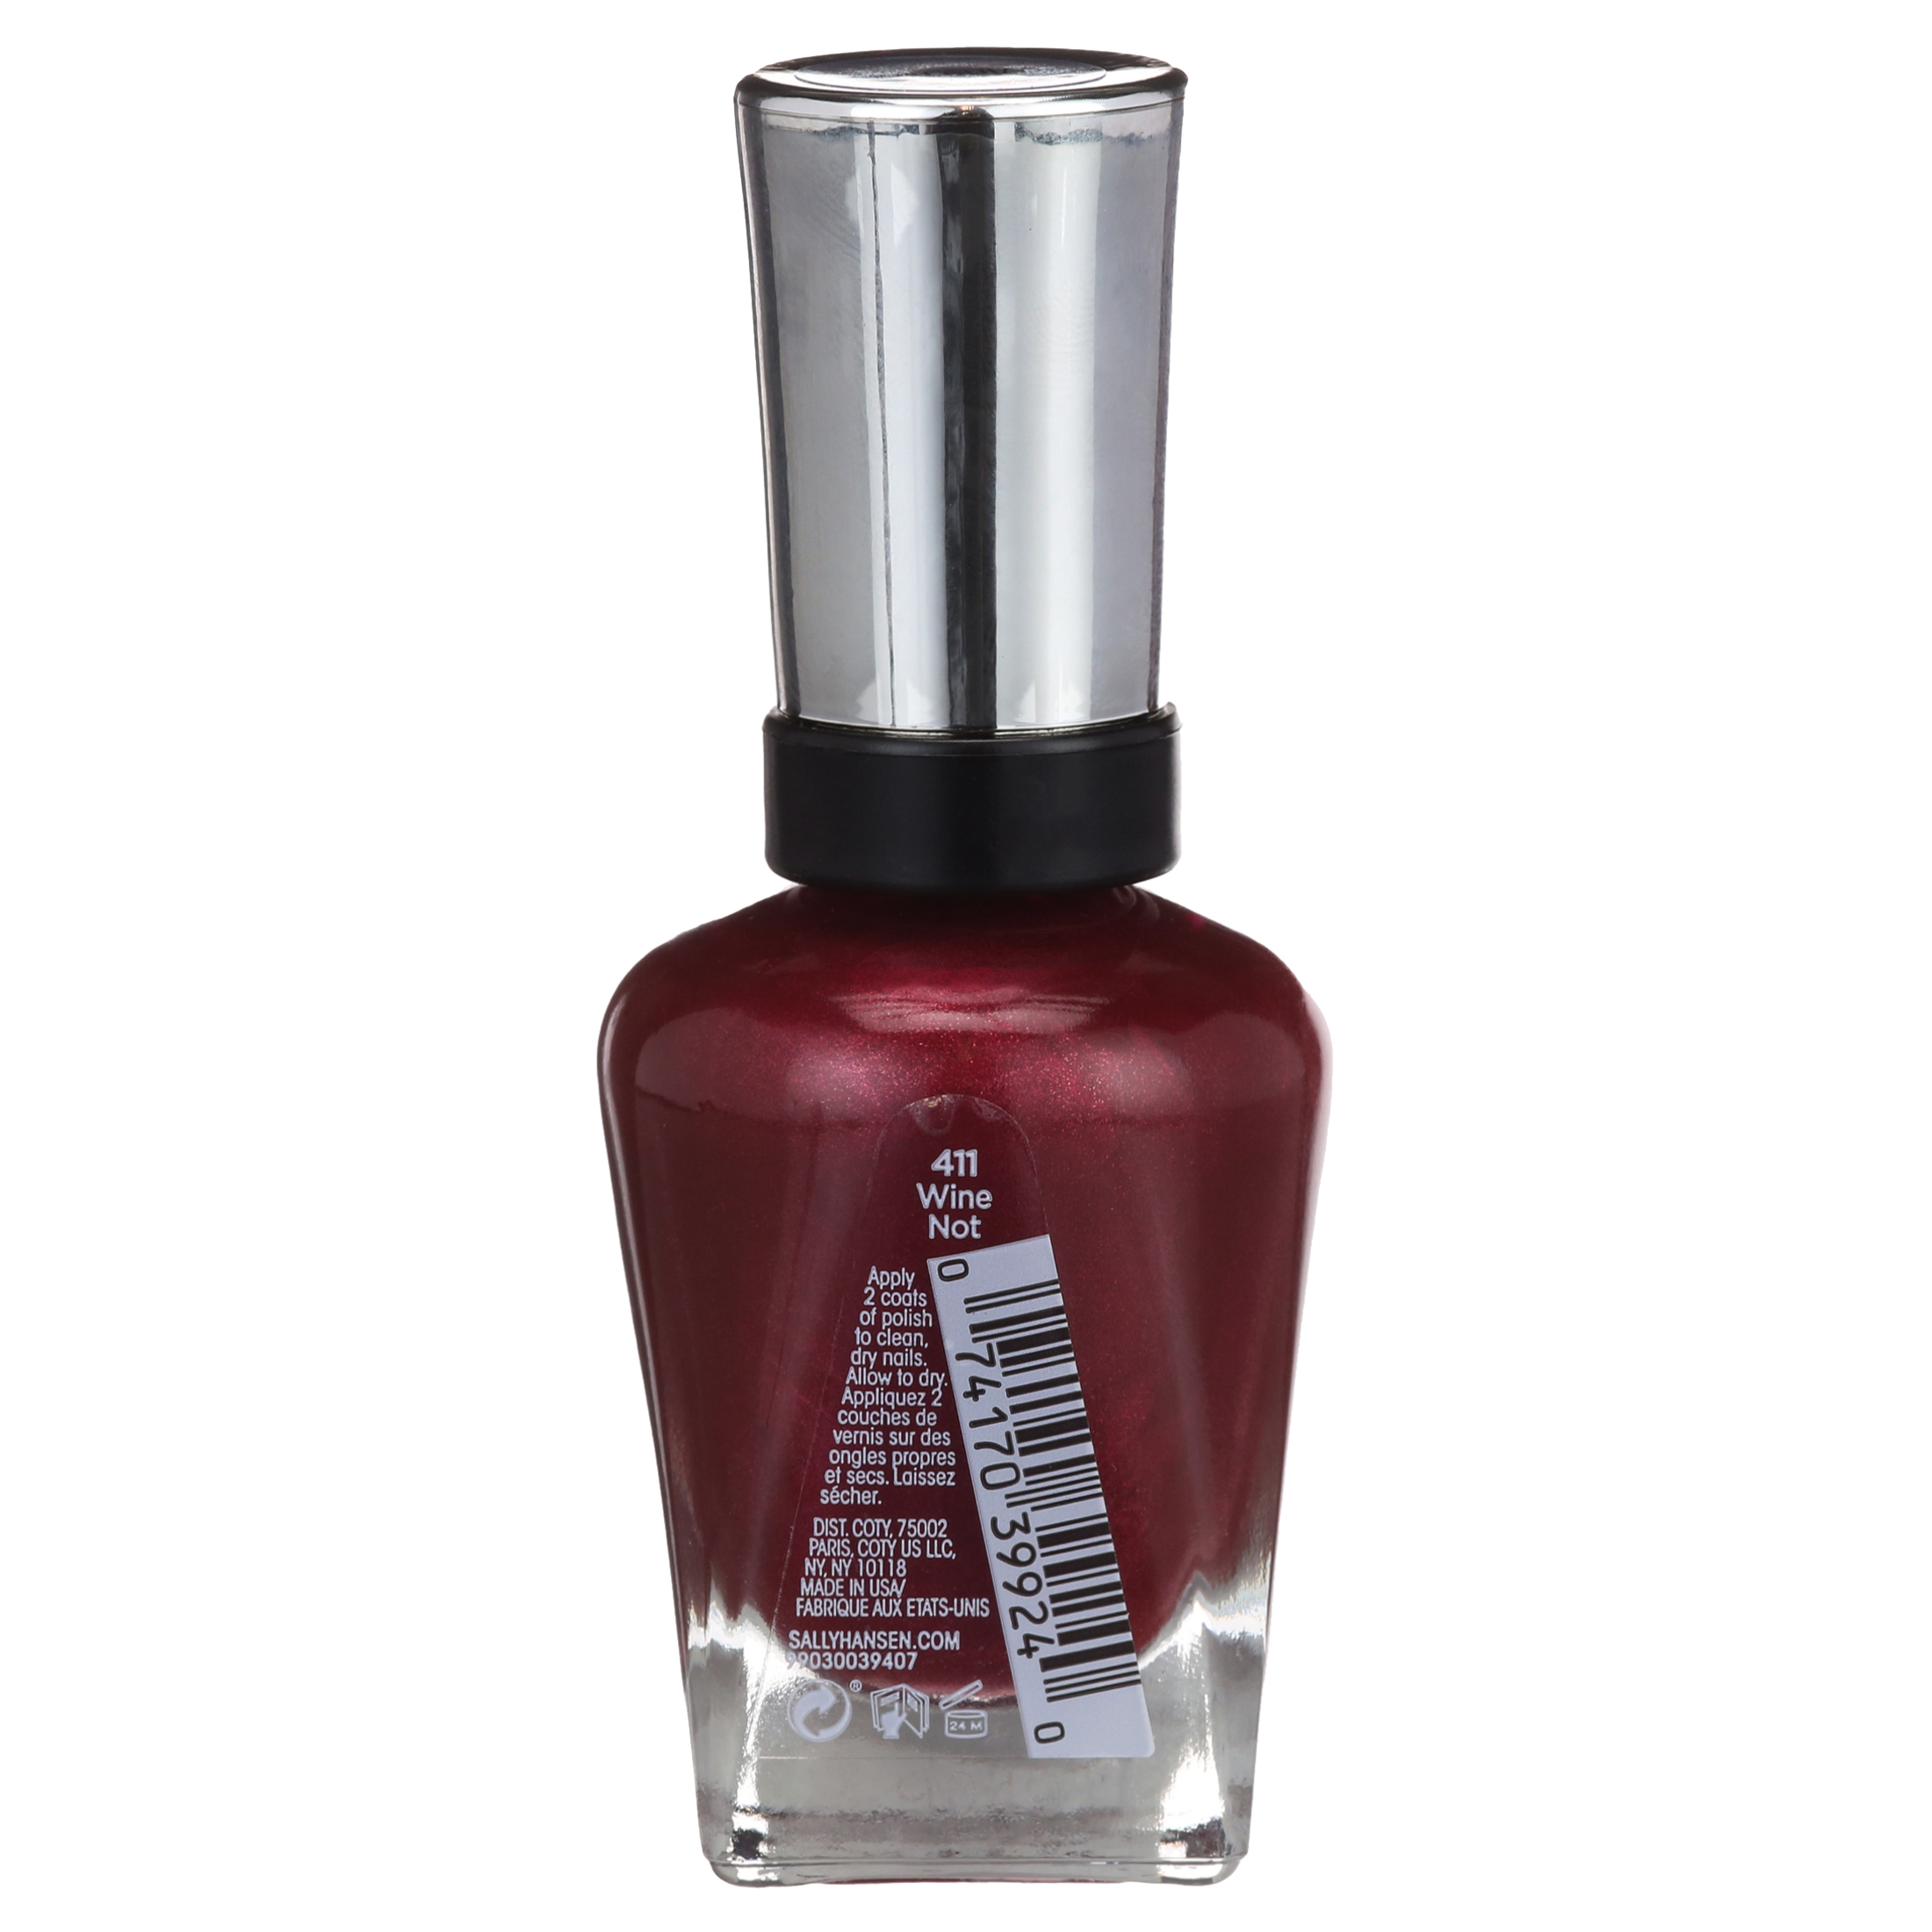 Sally Hansen Complete Salon Manicure Nail Color, Wine Not - image 5 of 8